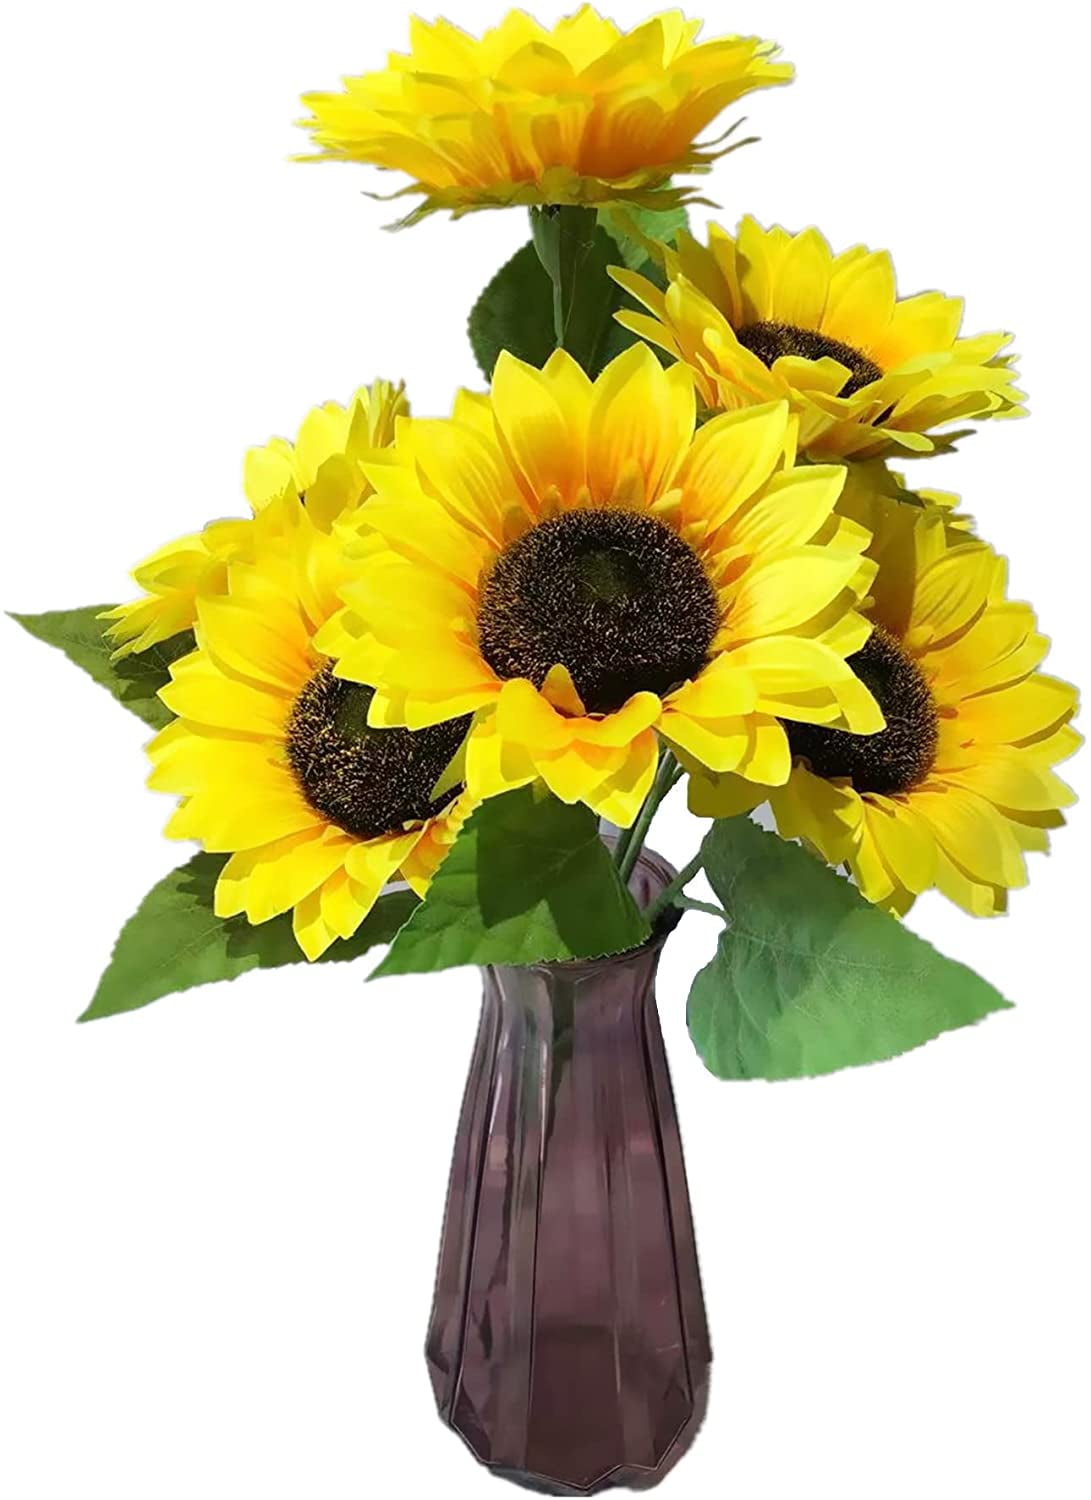 ZFProcess 6 PCS Large Sunflowers Artificial Flowers Long Stems Silk  Sunflowers Bulk Yellow Bouquets,One Branch Has One Flower Heads,Decoration  for